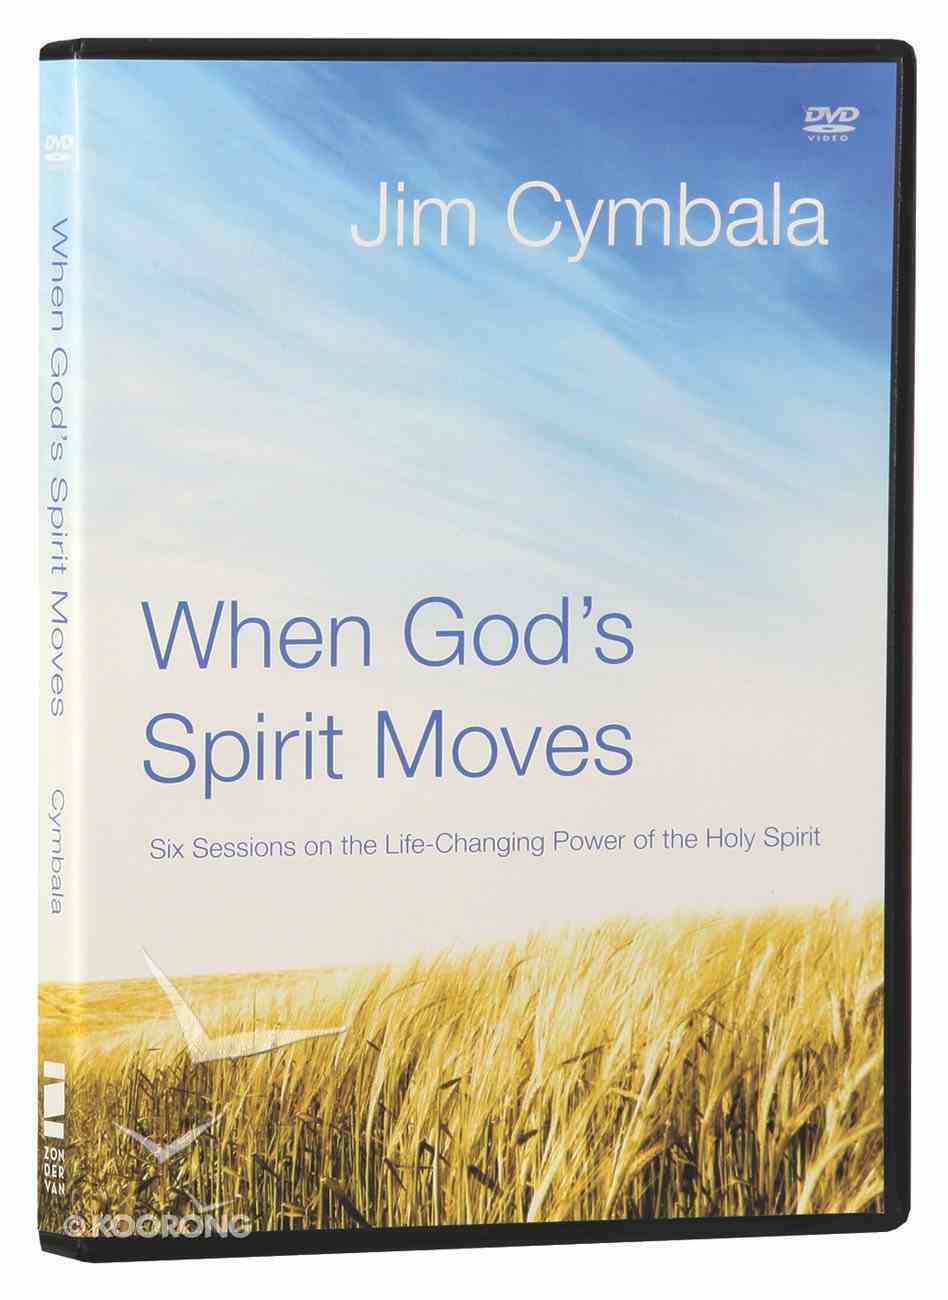 When God's Spirit Moves Pack (Participant's Guide/dvd) Pack